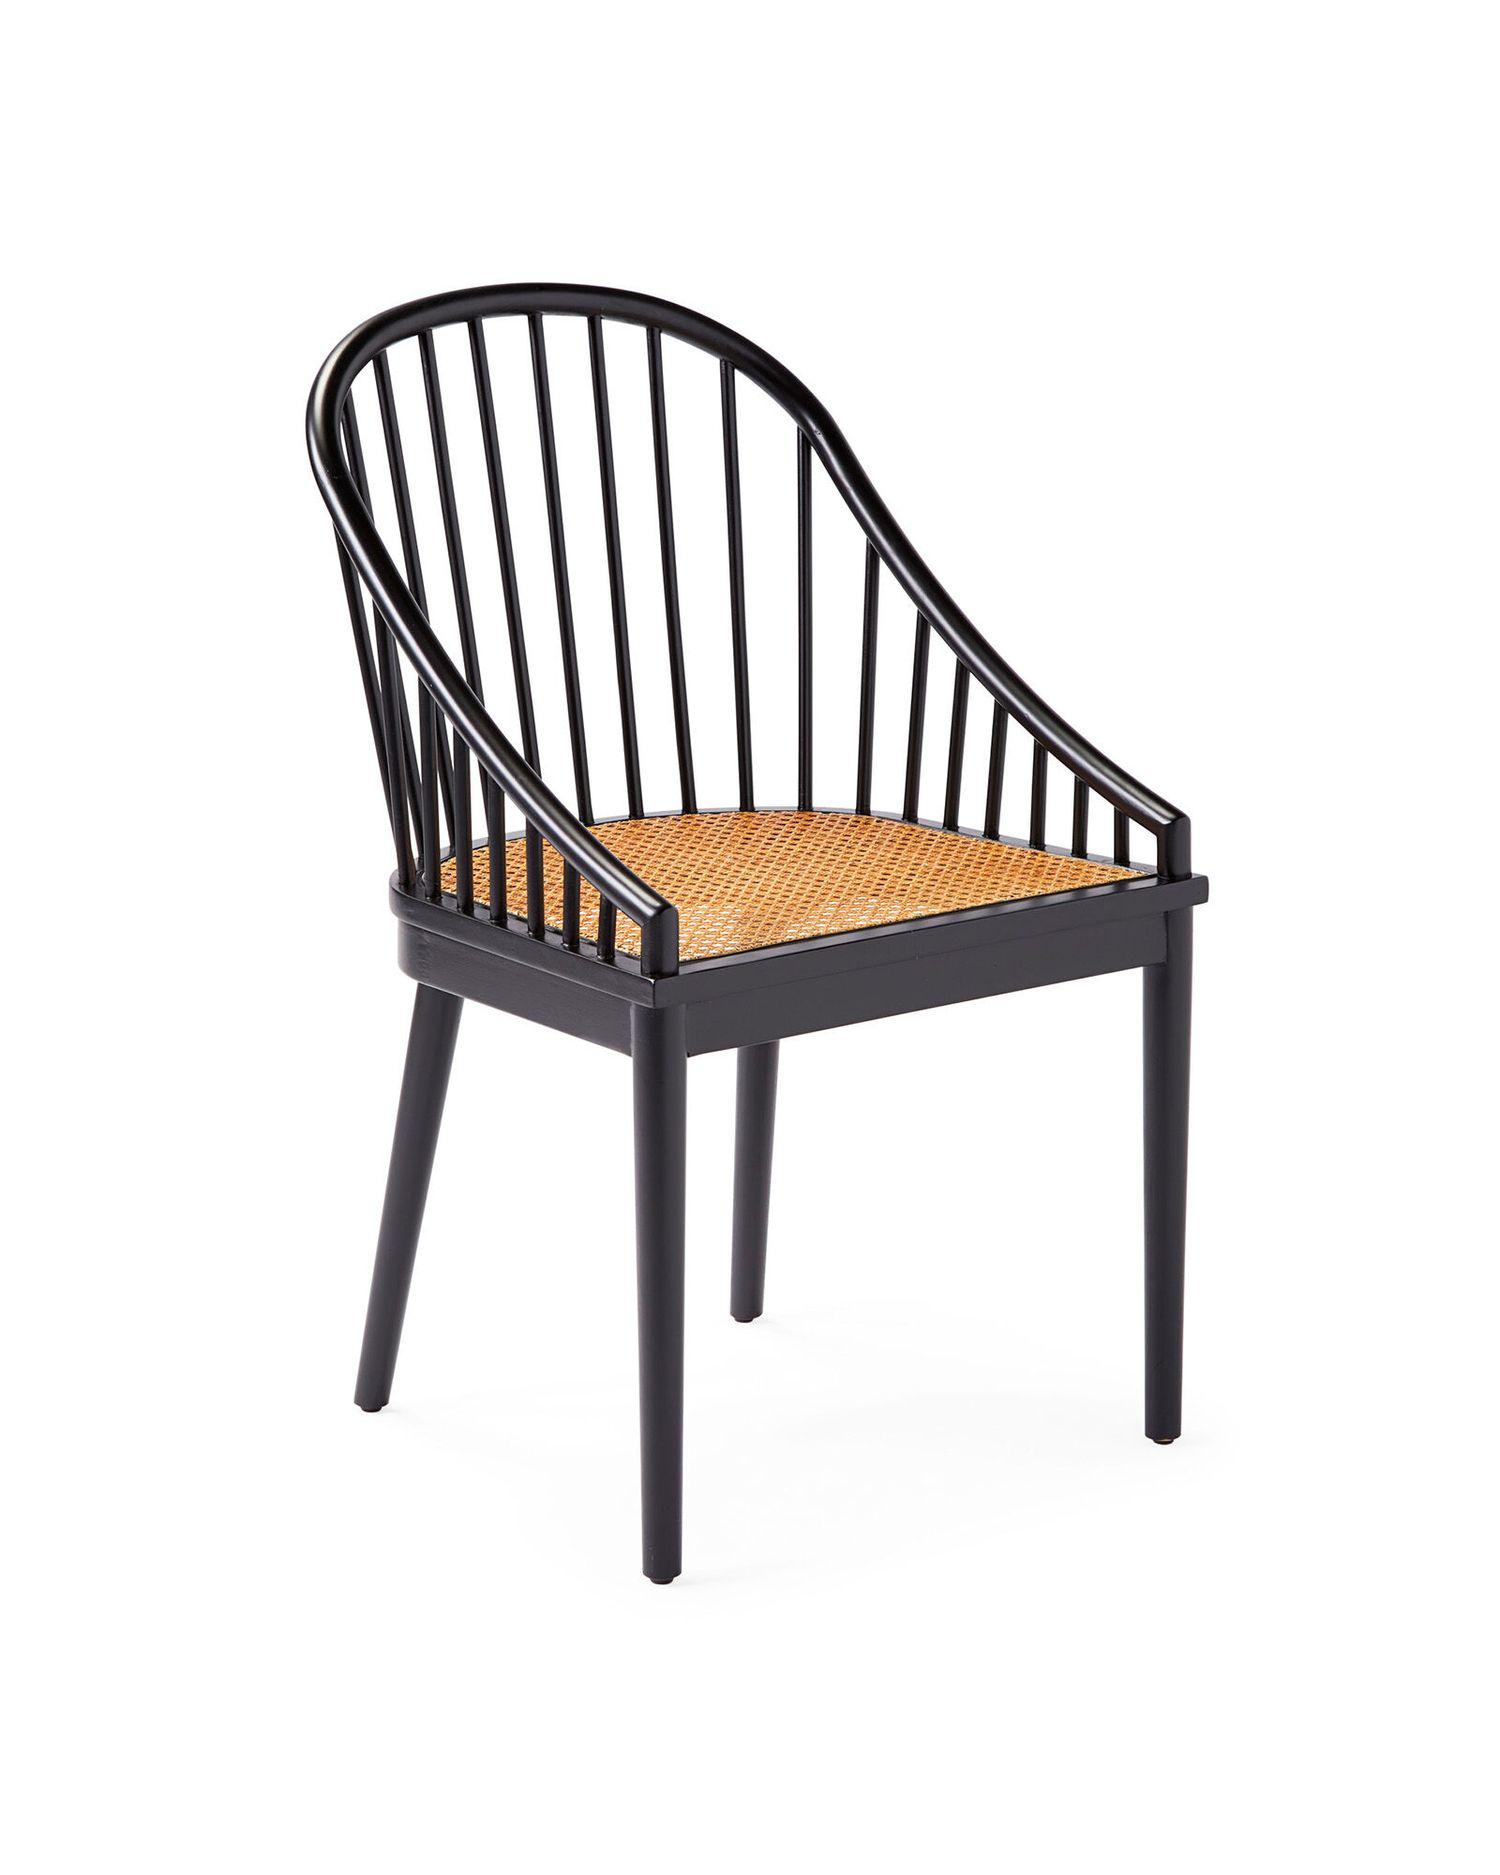 Shop Millbrook Dining Chair from Serena & Lily on Openhaus